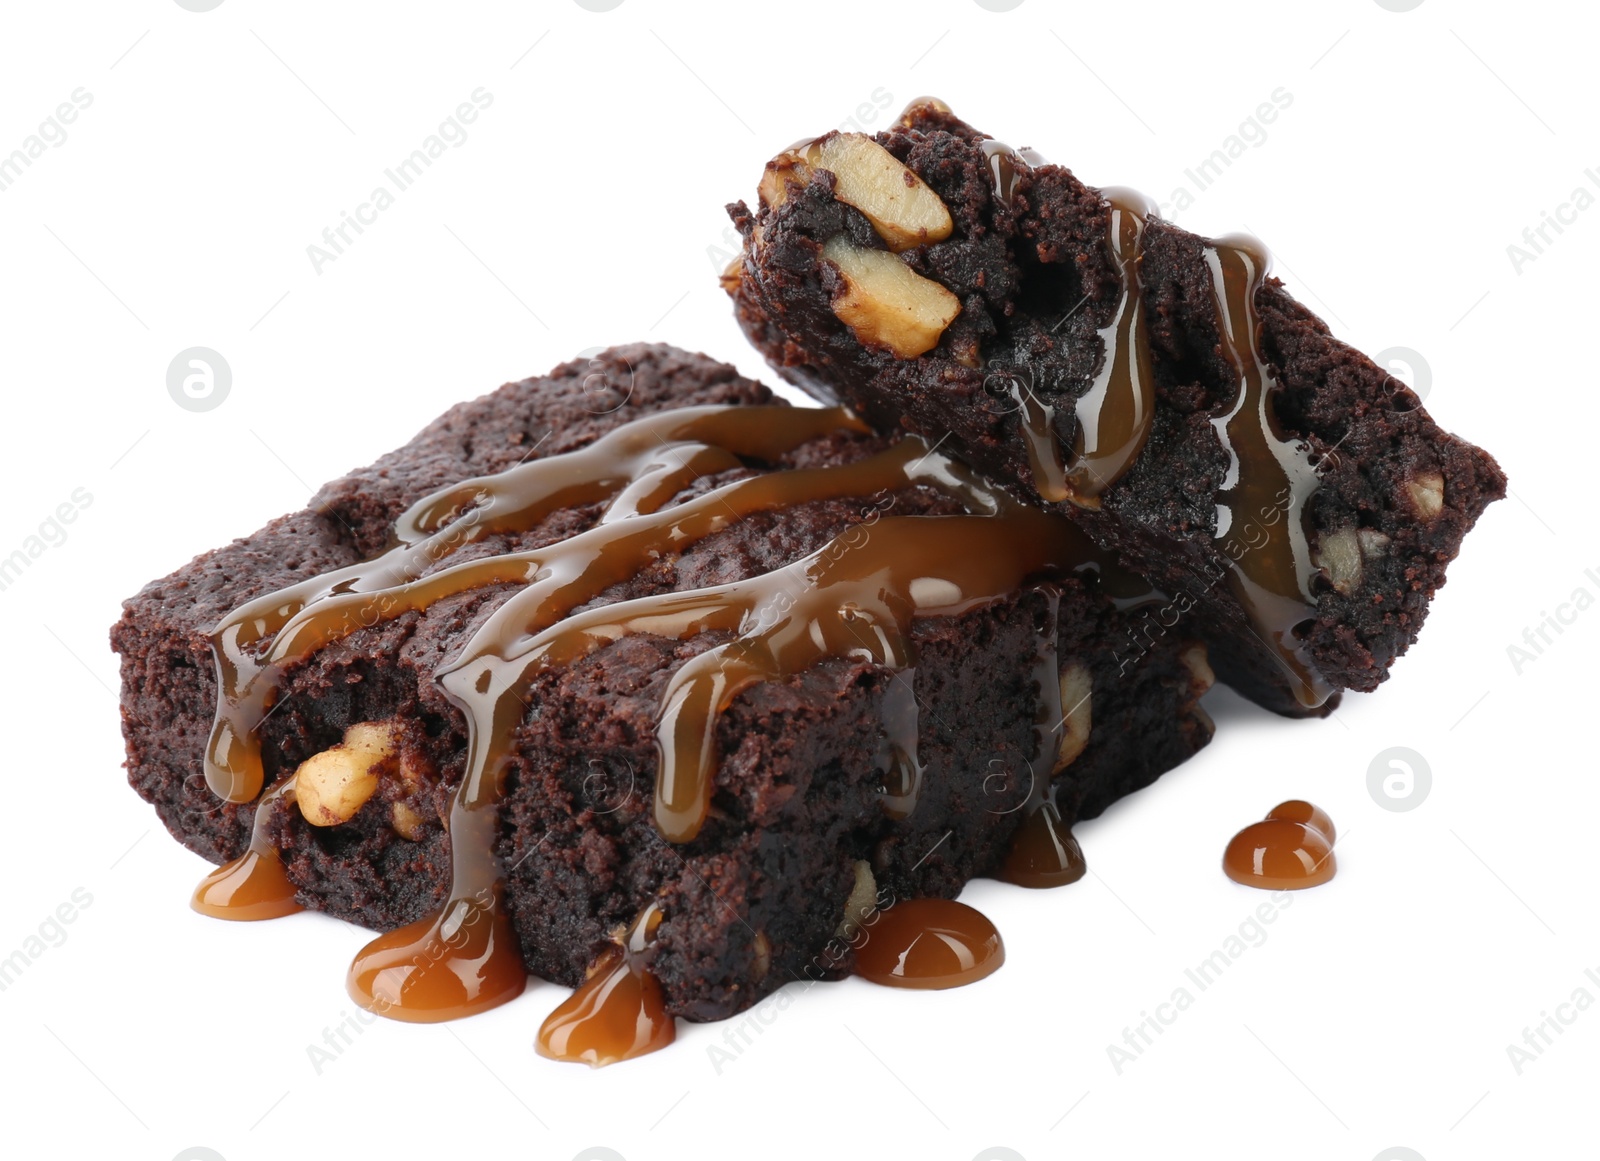 Photo of Delicious chocolate brownies with nuts and caramel sauce on white background